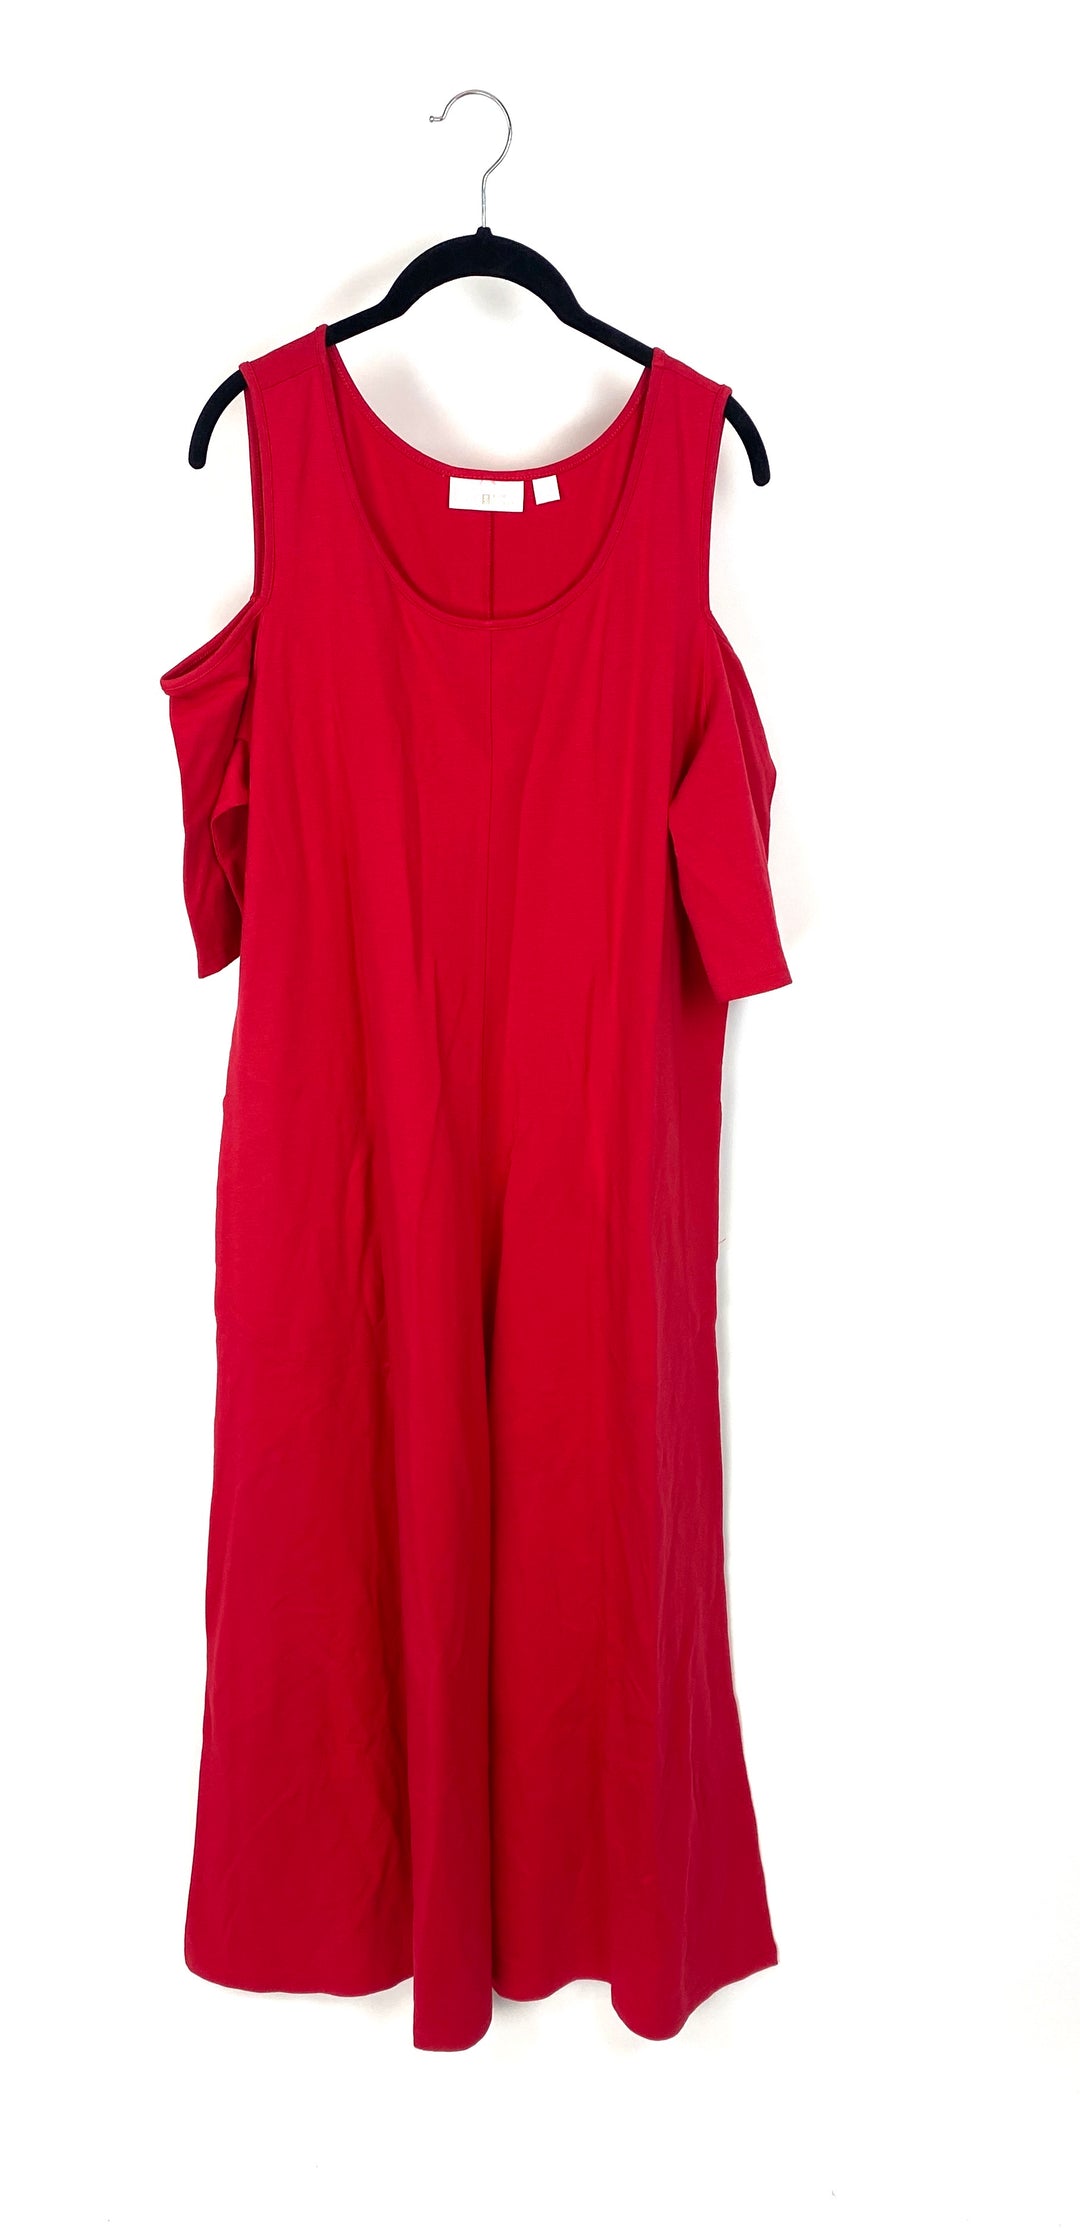 Red Cutout Shoulder Dress - Large/Extra Large